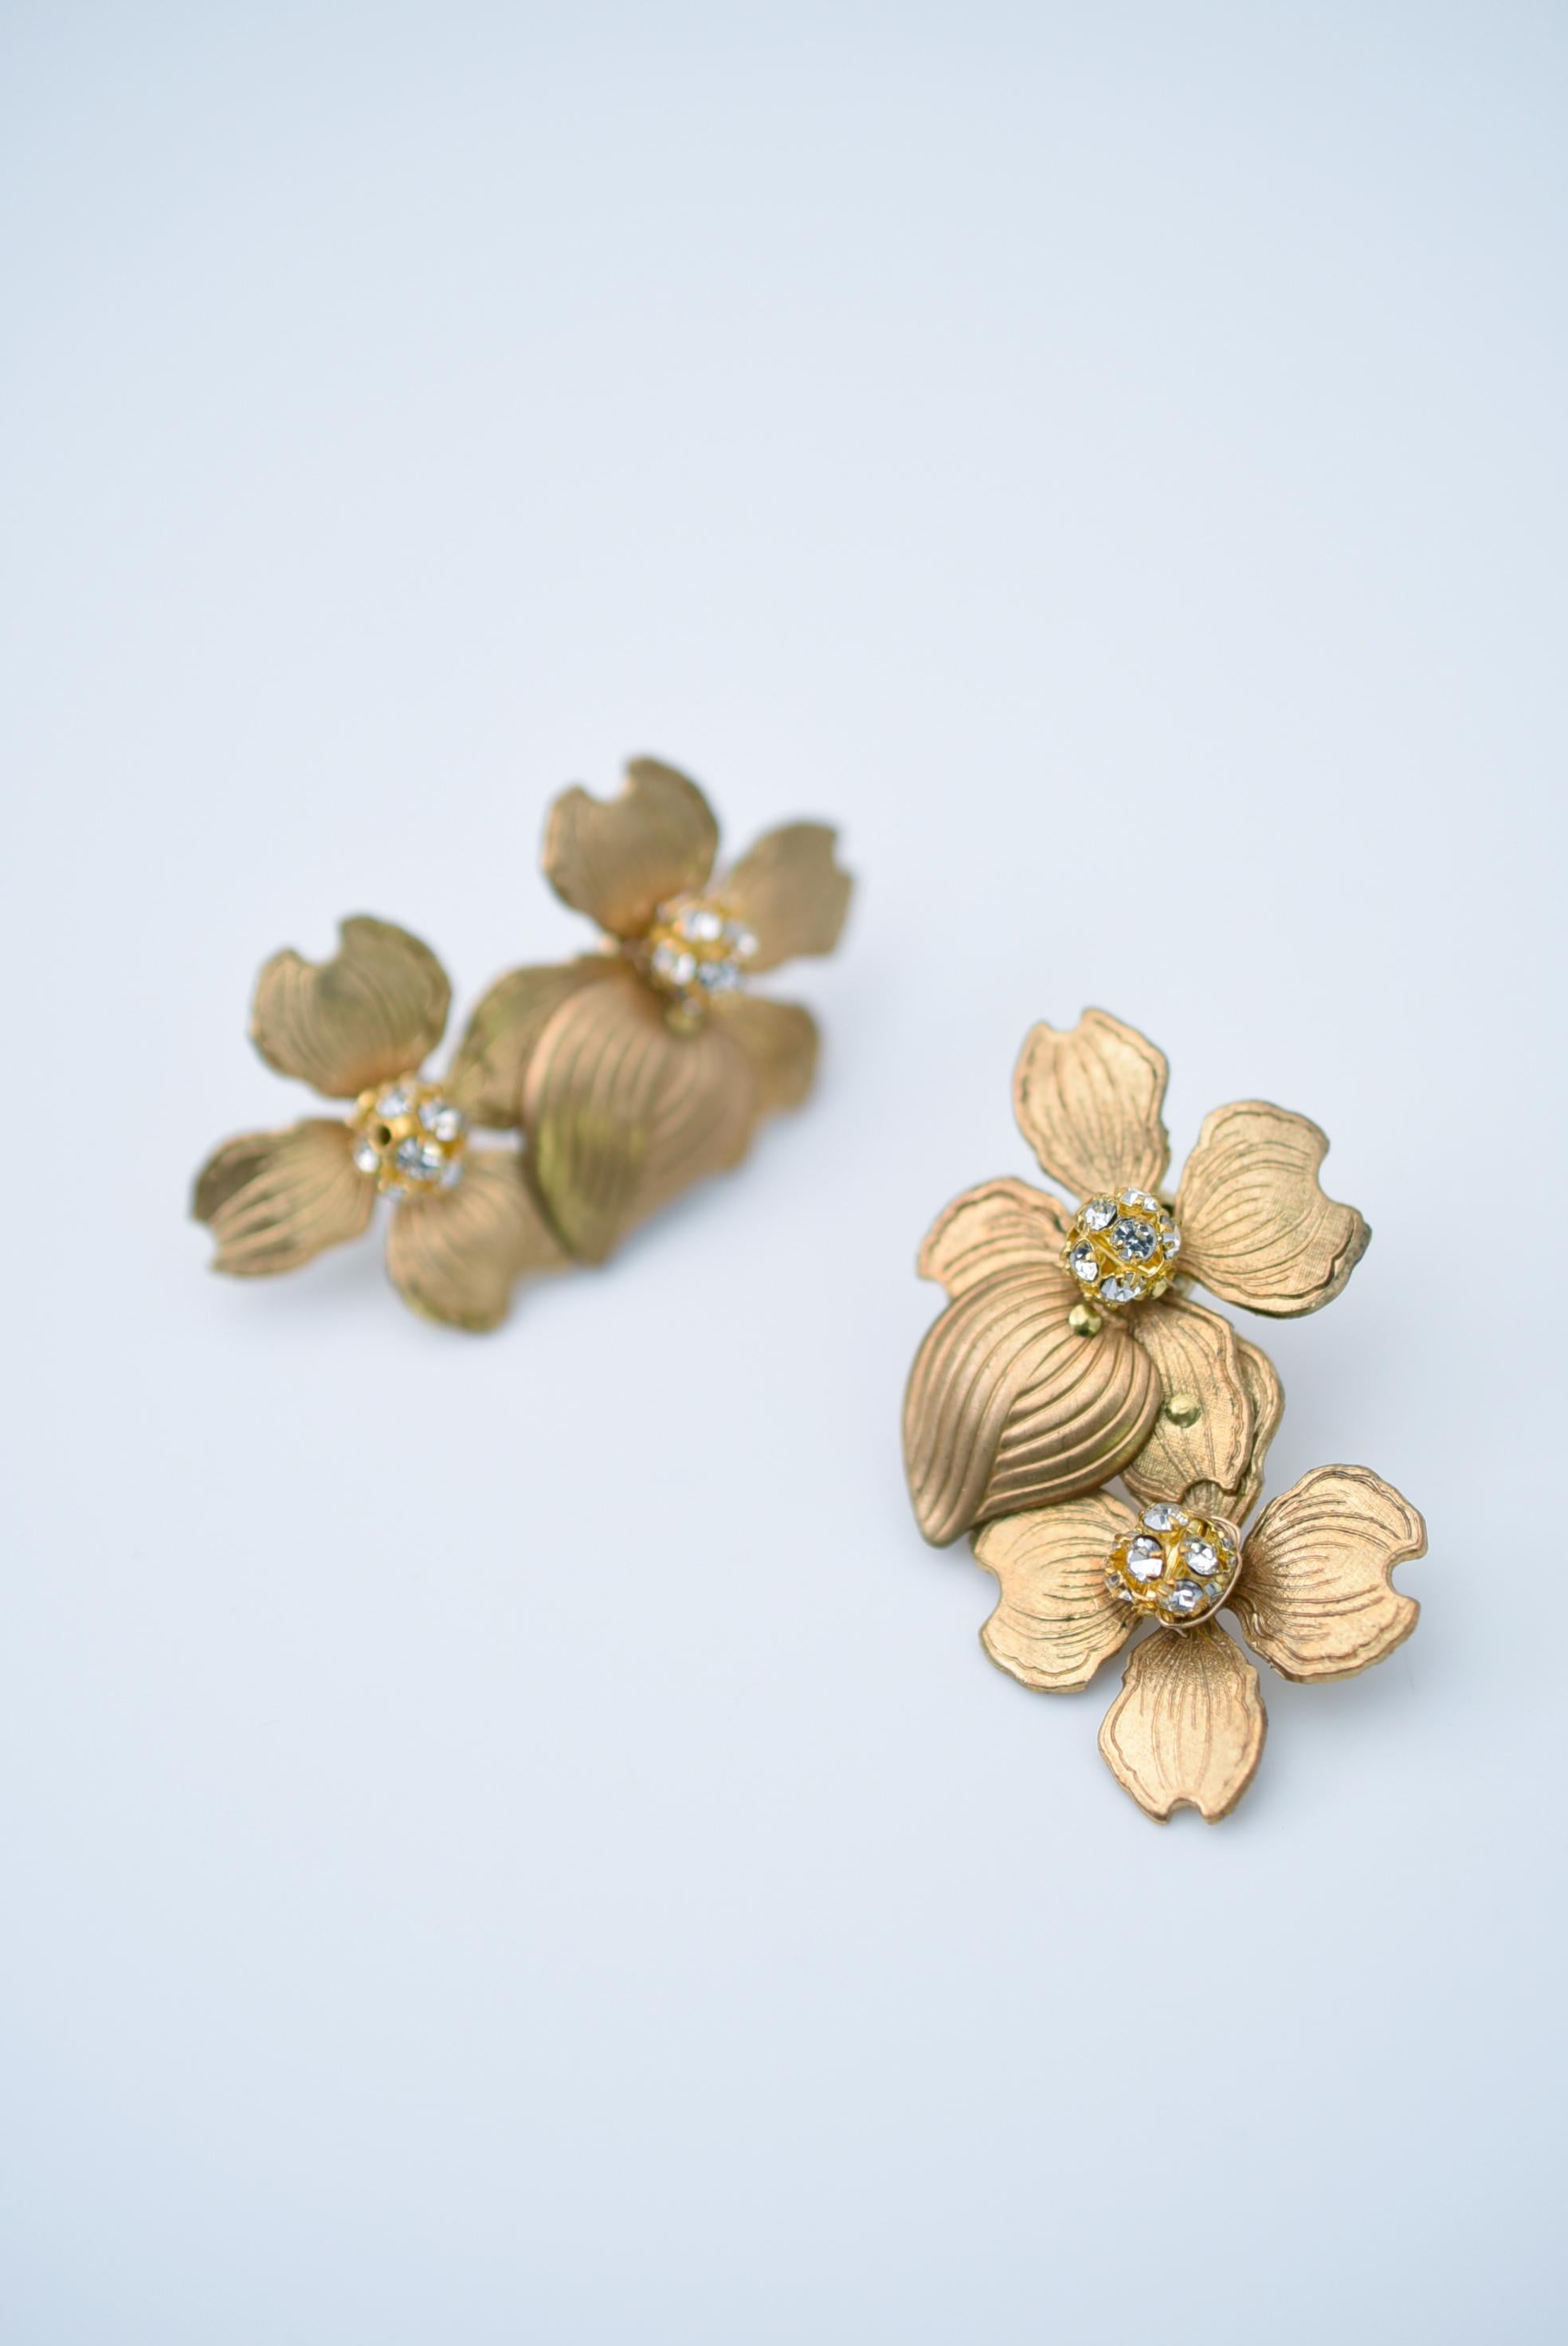 material:Brass, 1970s metal parts
size:length 4cm


Although the earrings are a little long, they do not look so big when you wear them because they are made of gold that blends well with your skin.
The sparkles on the core of the flower are very